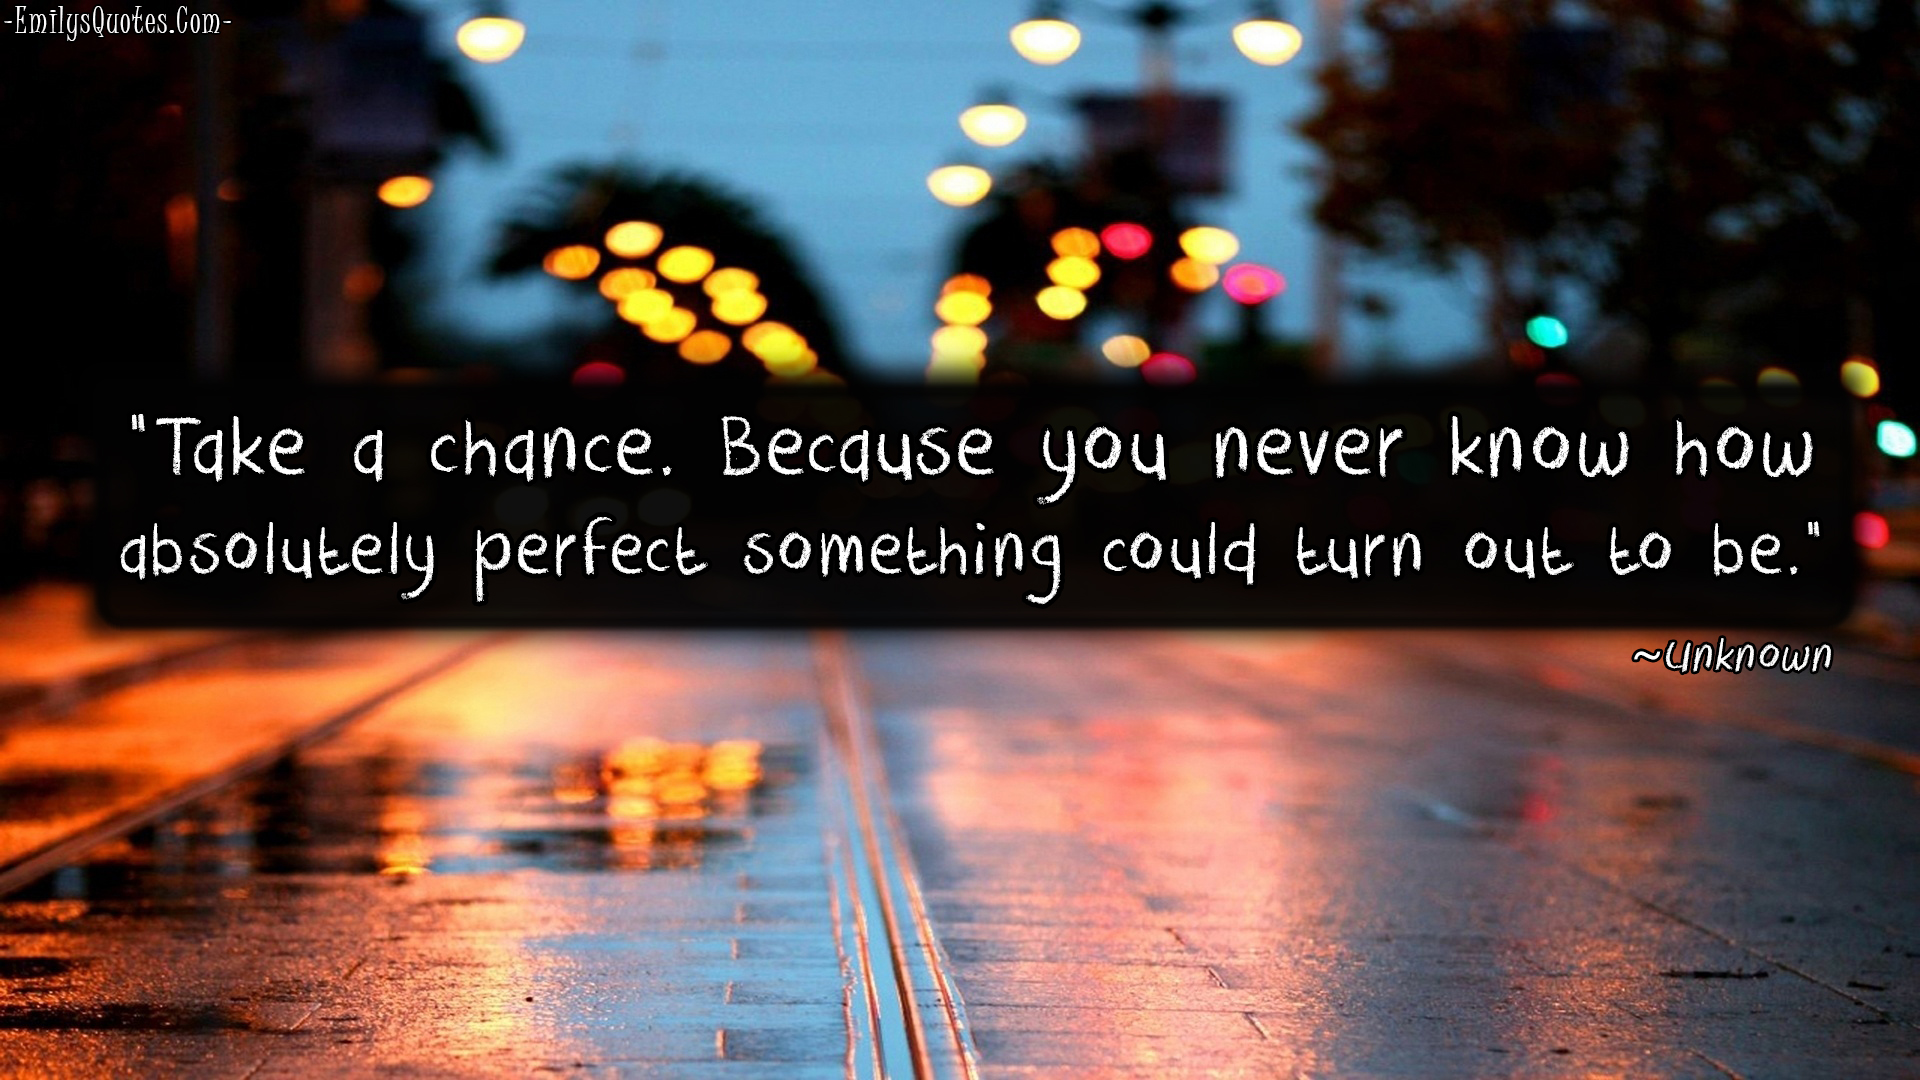 Take a chance. Because you never know how absolutely perfect something could turn out to be